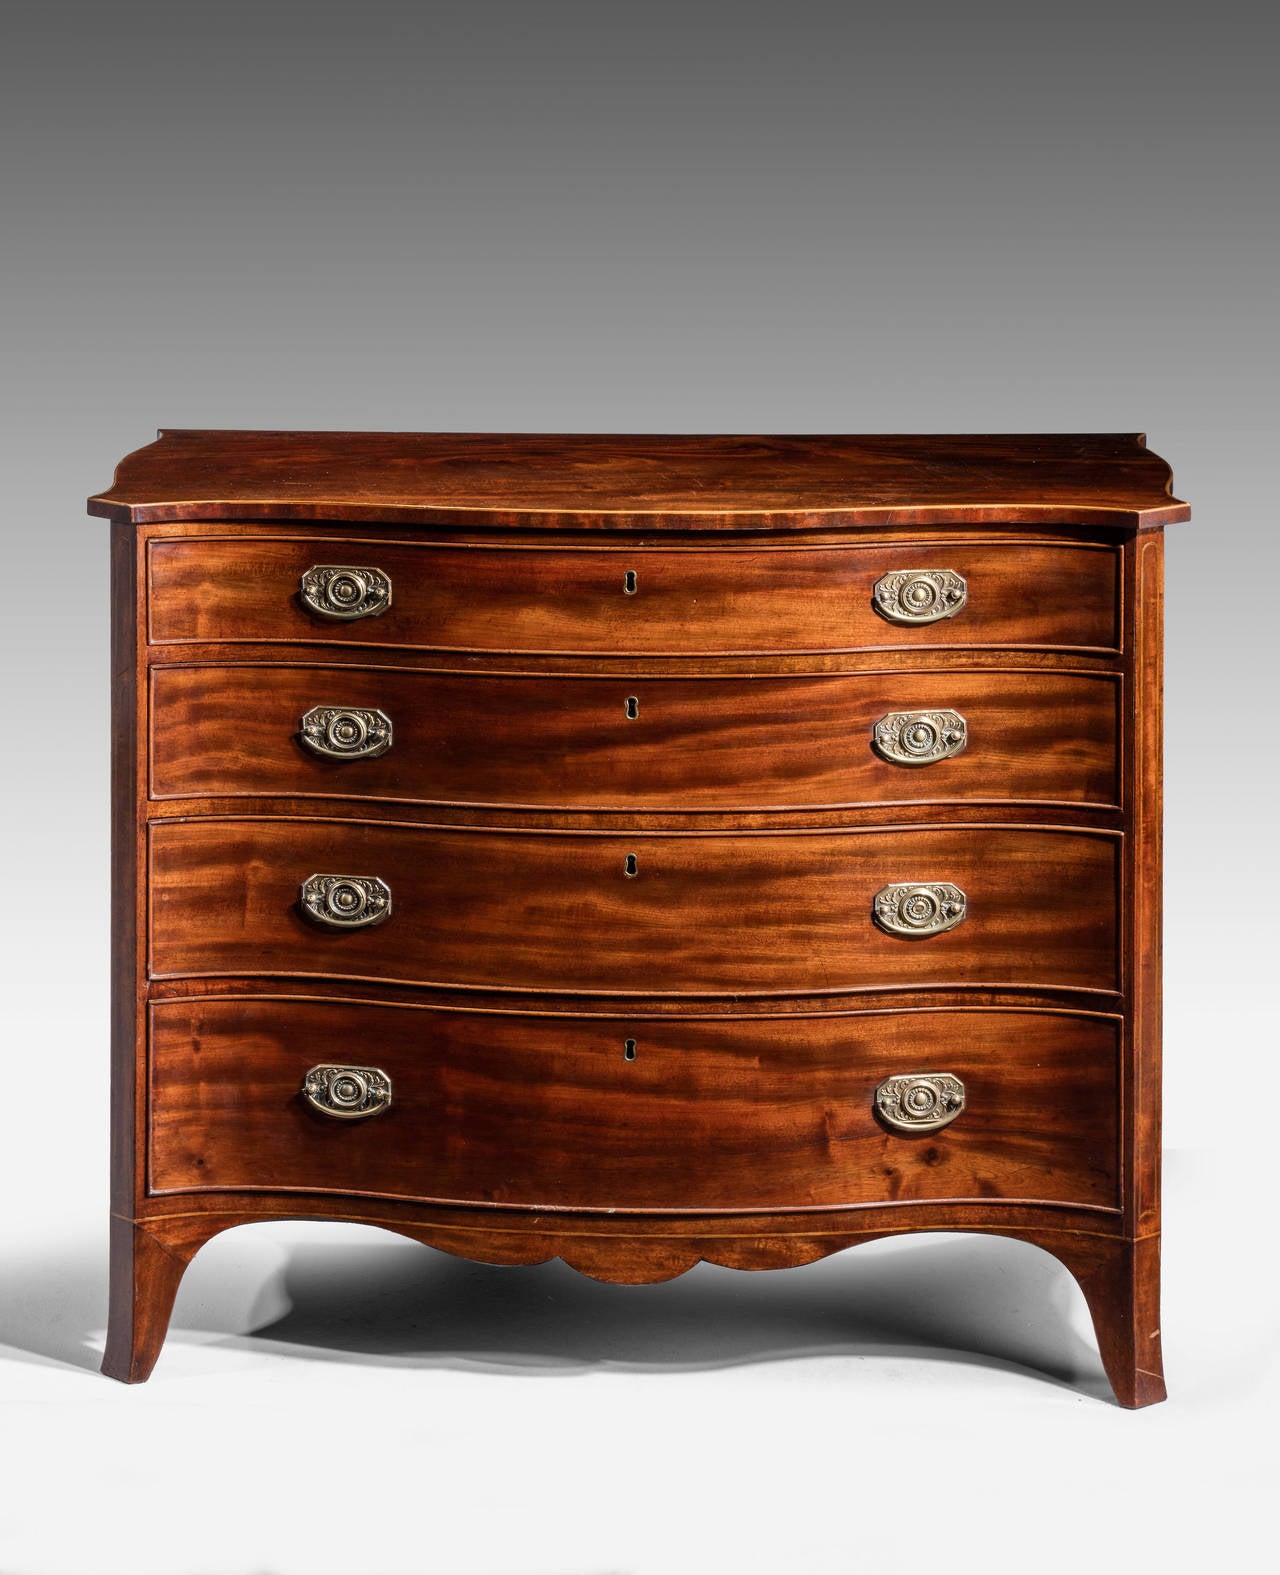 A good George III period serpentine chest of drawers. The top with serpentine ends, edged in boxwood. Fine original period handles. On high swept bracket feet.